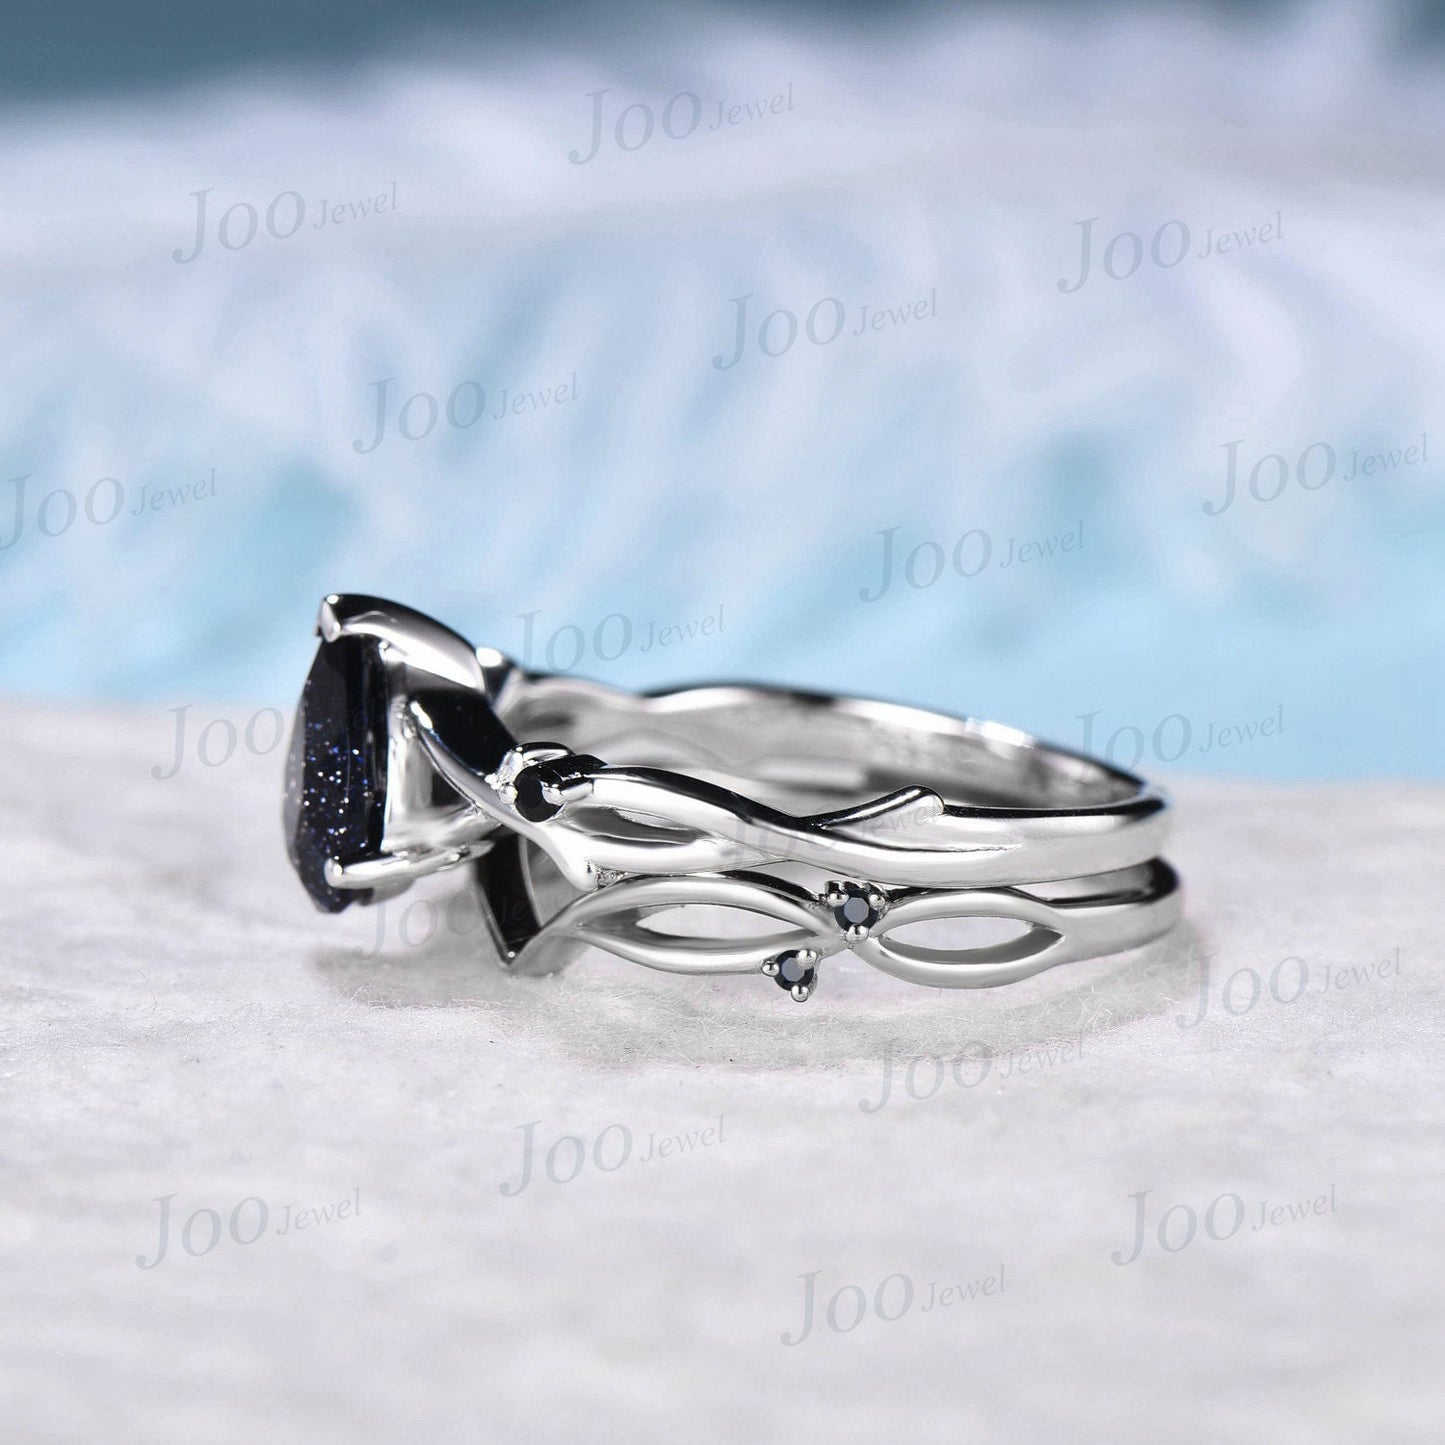 1.25CT Twig Vine Blue Sandstone Ring Set 10K White Gold Starry Sky Black Gemstone Ring Nature Inspired Jewelry Unique Wedding/Promise Gift